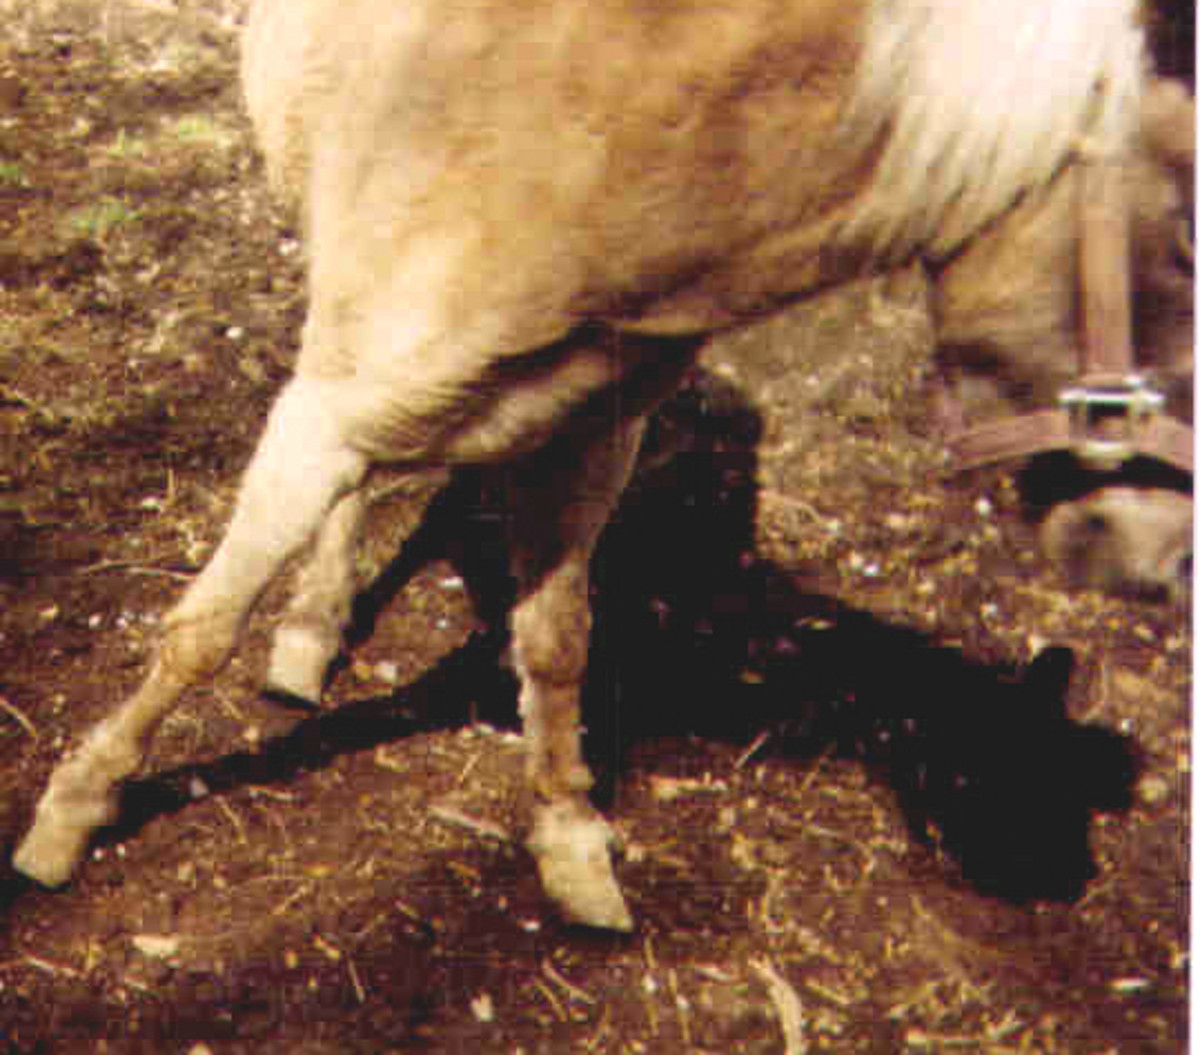 Photo #1 - This is "Sugar Candy," a pony with extremely overgrown hooves and founder.  Her hooves were actually much worse than what they look like in this photo.  About 6 inches more of the hooves were buried in soft dirt that you can't see here. 